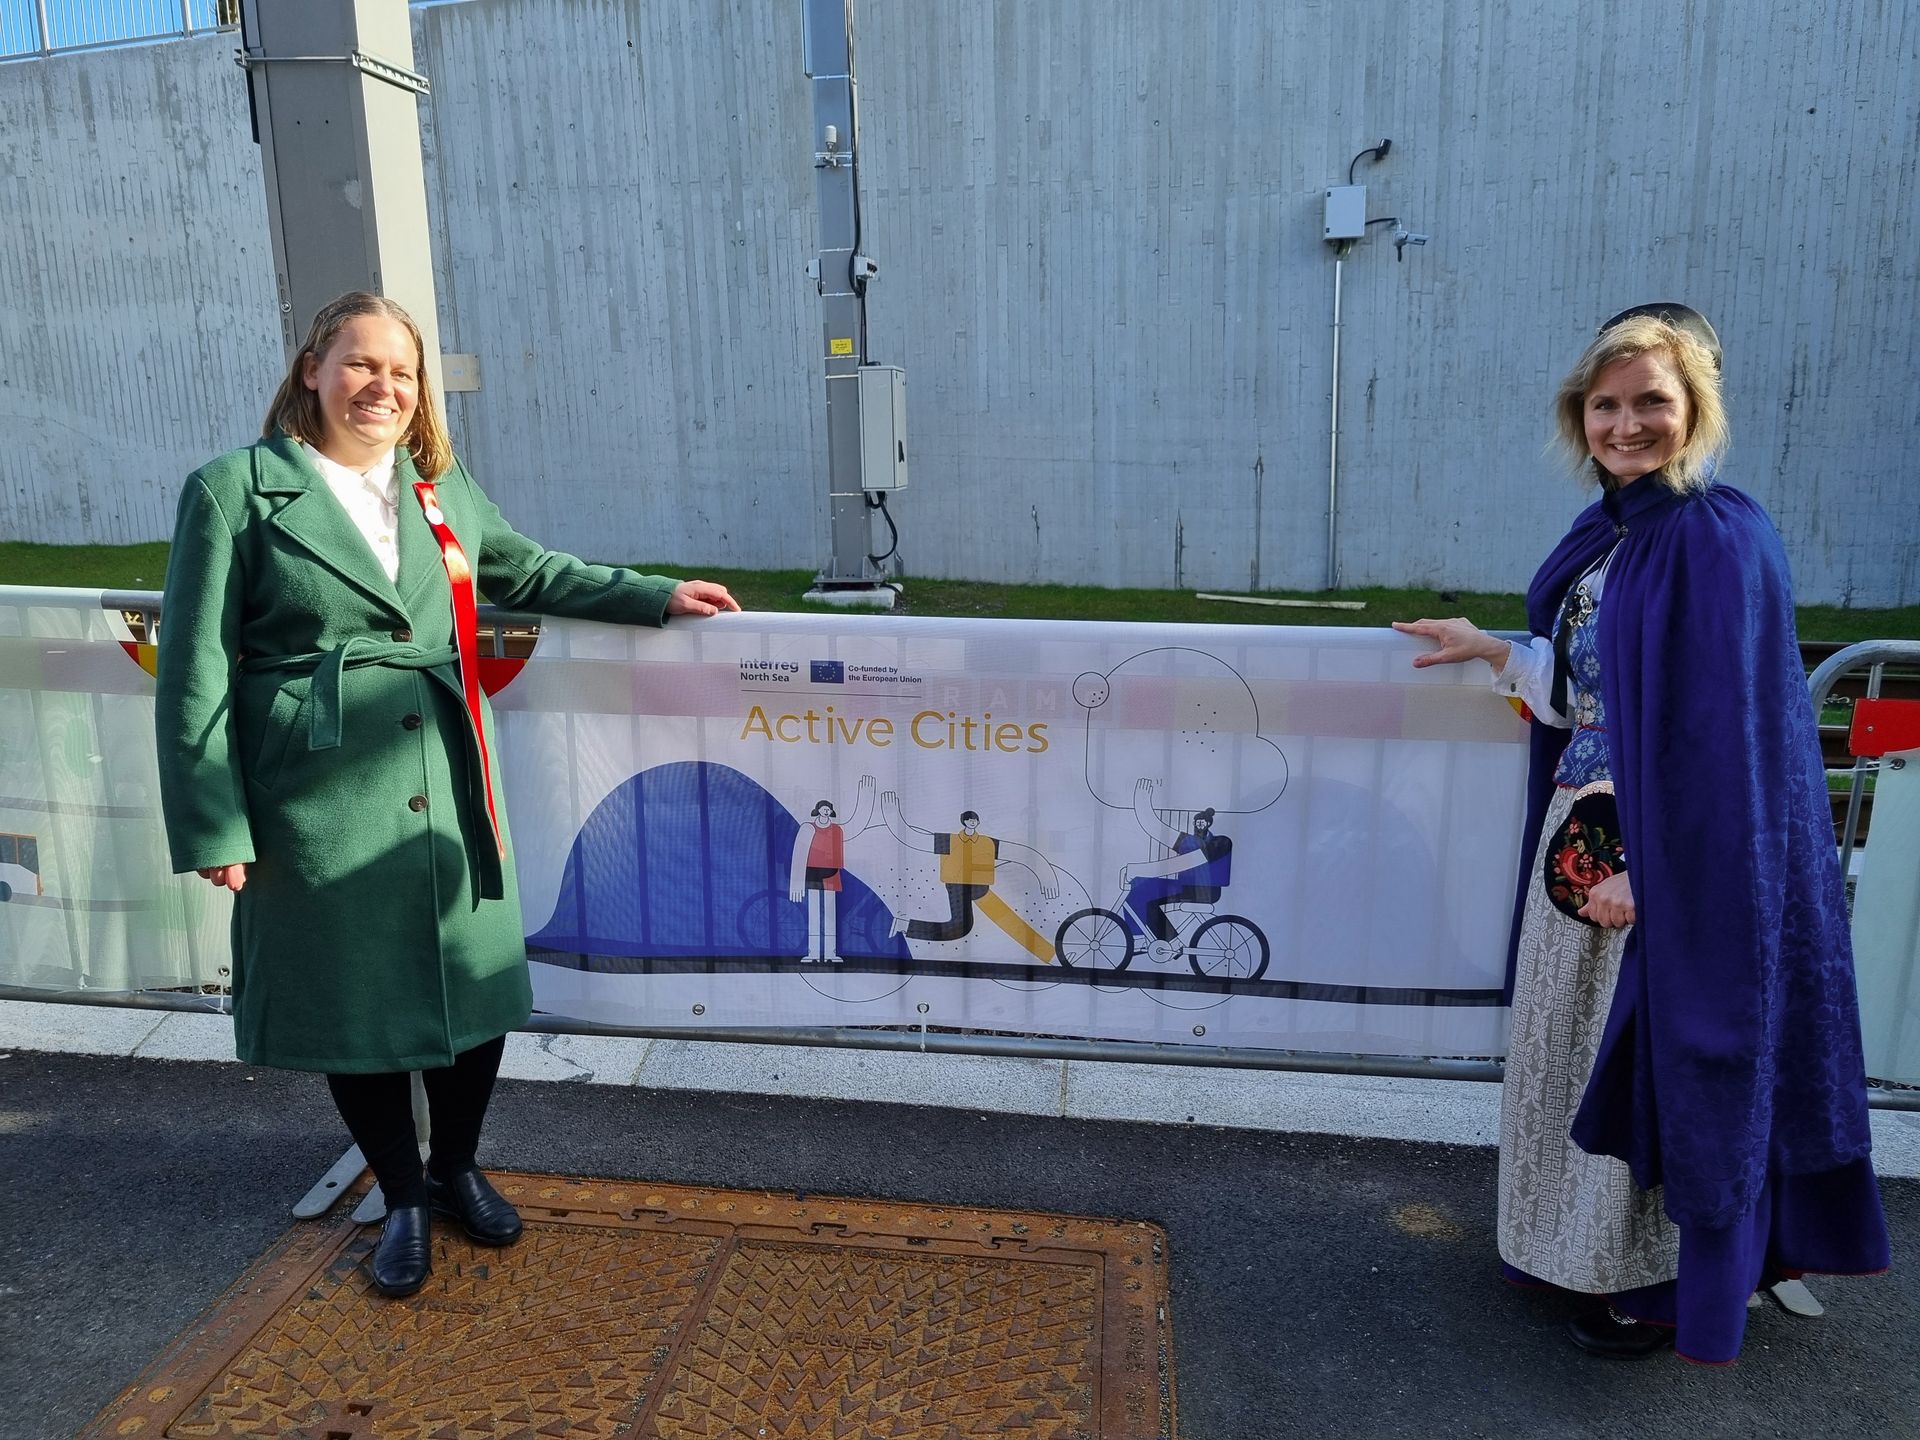 Marthe Hammer, head of the transport committee in the county, and Ingrid Nergaard Fjeldstad, City Development Council with the Active Cities banner